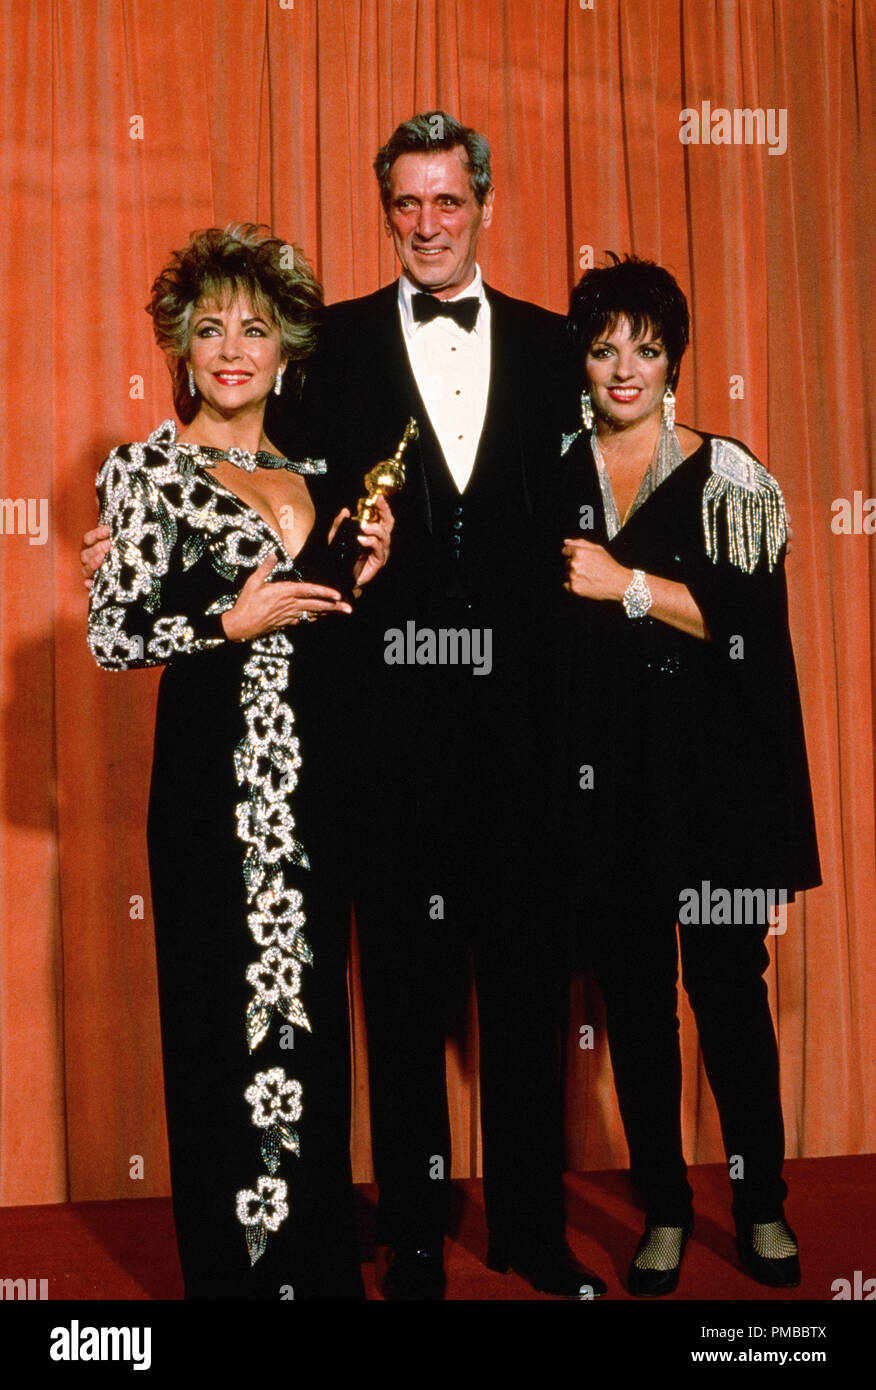 Liza Minnelli, Rock Hudson and Elizabeth Taylor at the 42nd Annual Golden  Globe Awards, 1985 © JRC /The Hollywood Archive - All Rights Reserved File  Reference # 32914 410JRC Stock Photo - Alamy